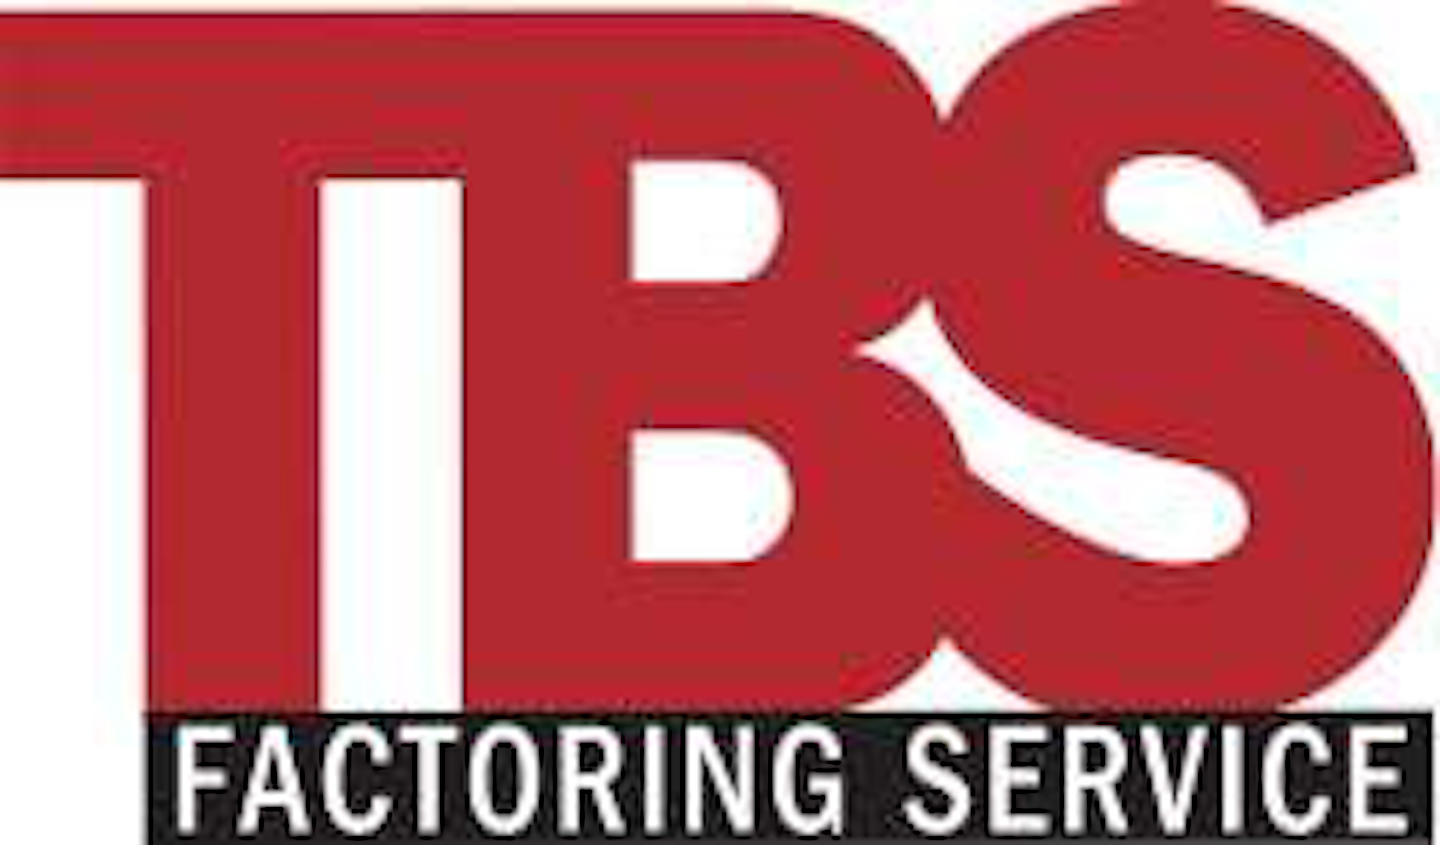 The Partners in Business program is sponsored by TBS Factoring.